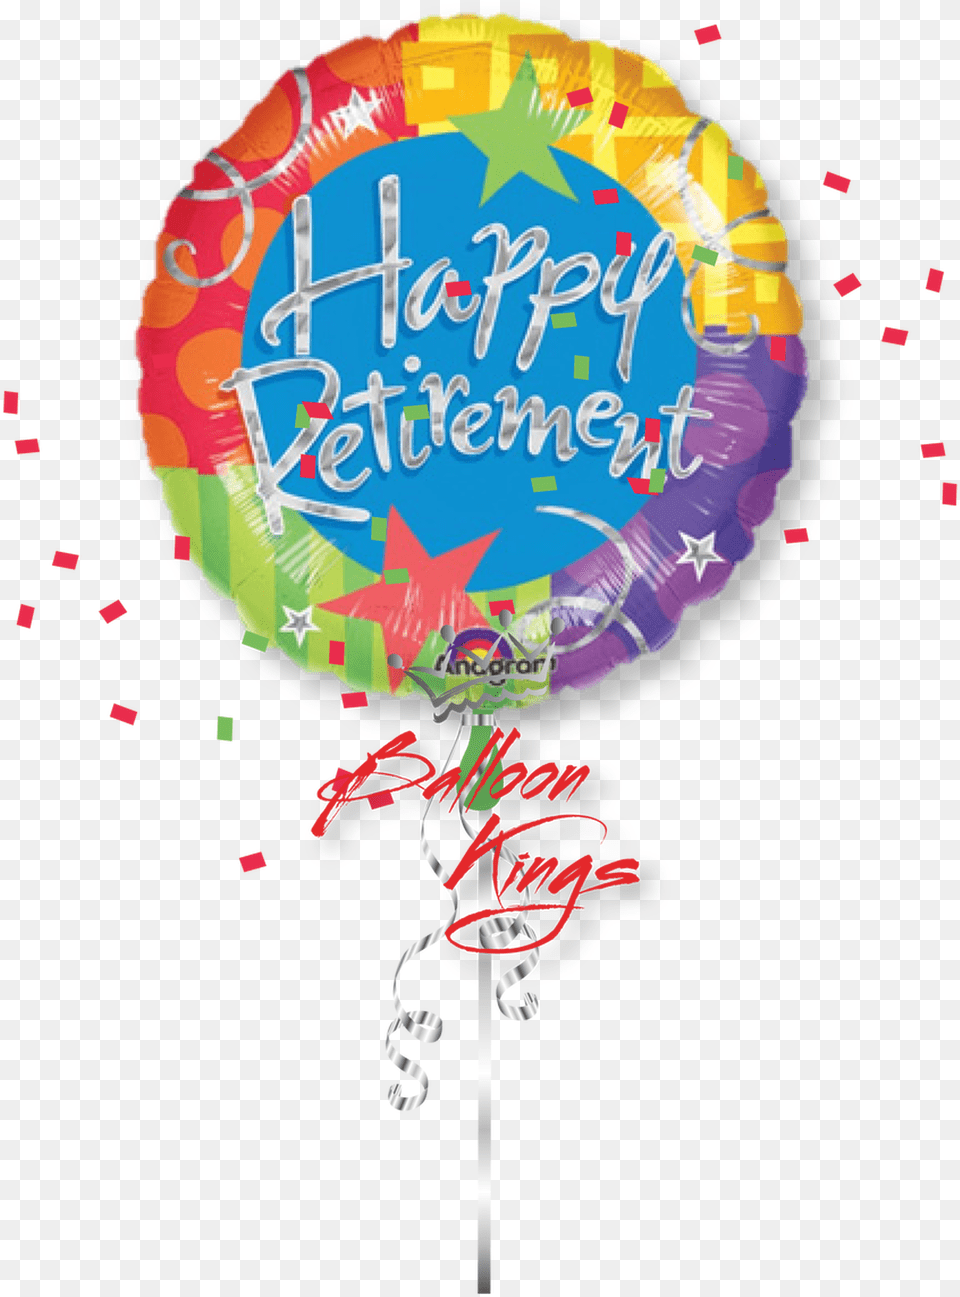 Large Happy Retirement Blitz Happy Retirement Images Cartoon, Balloon, Food, Sweets, Candy Free Png